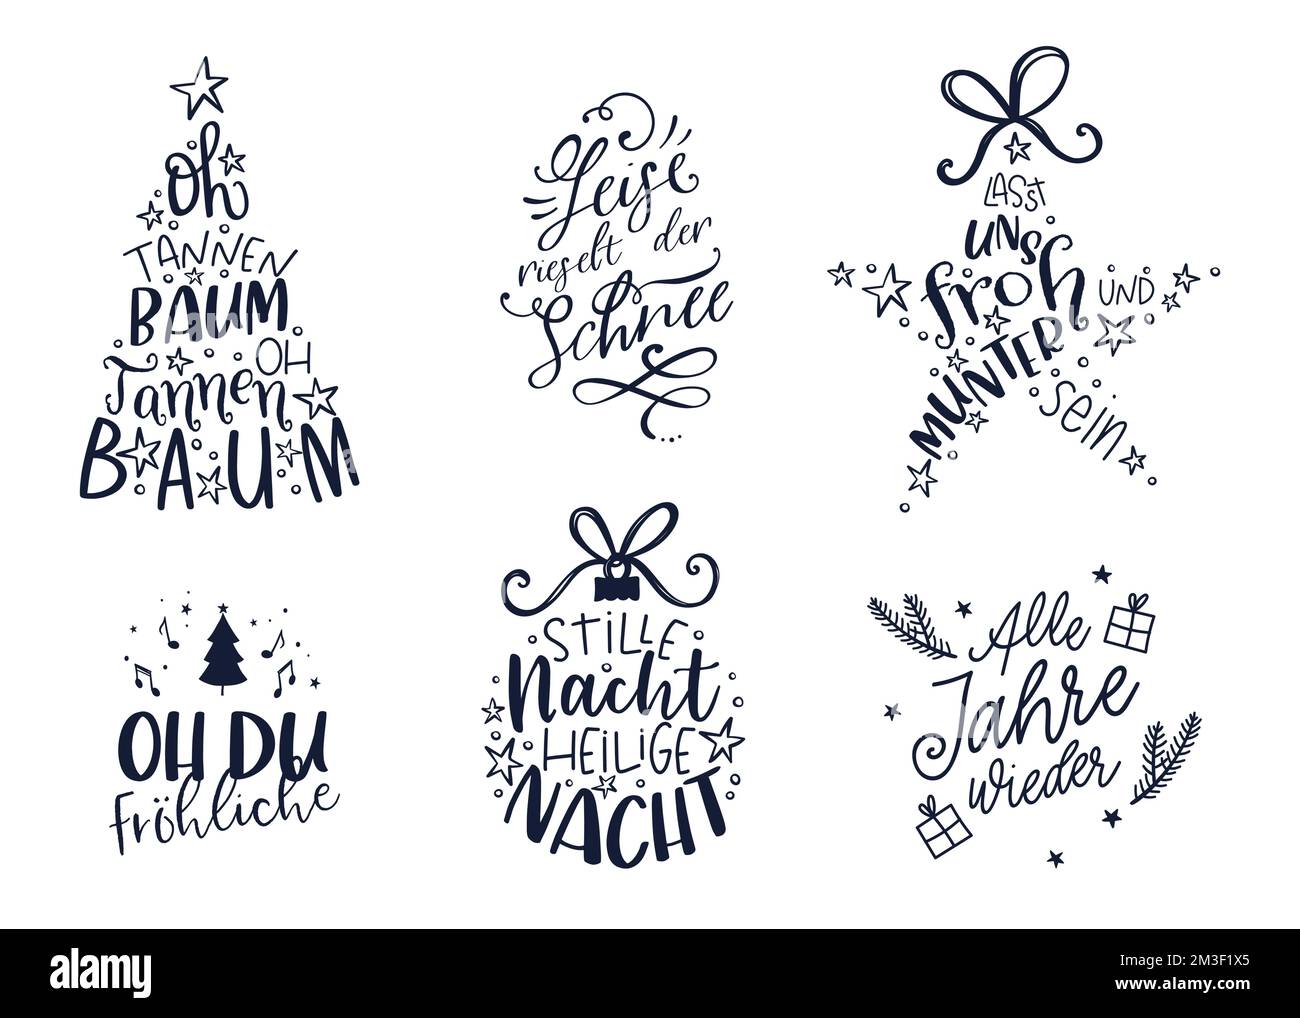 Lovely hand written Christmas design in German language, various sayings and phrases from popular christmas songs - great for cards, invitations, bann Stock Vector